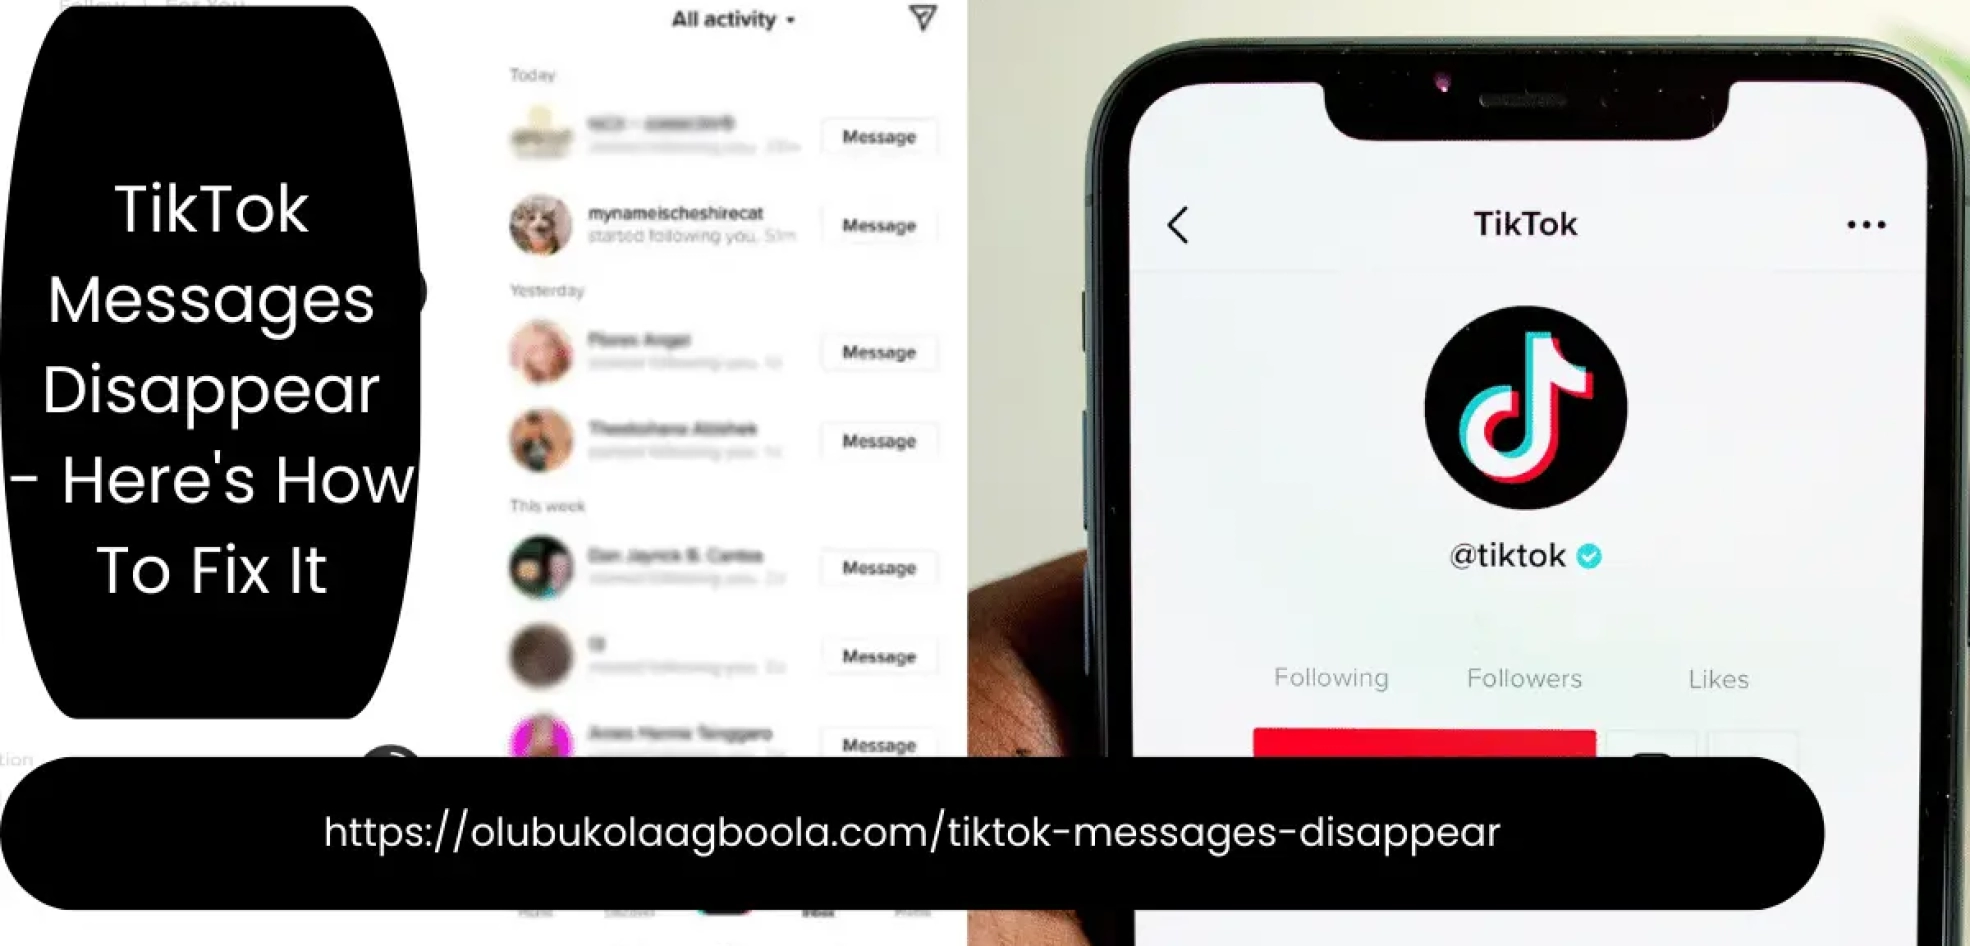 TikTok Messages Disappear - How To Fix It